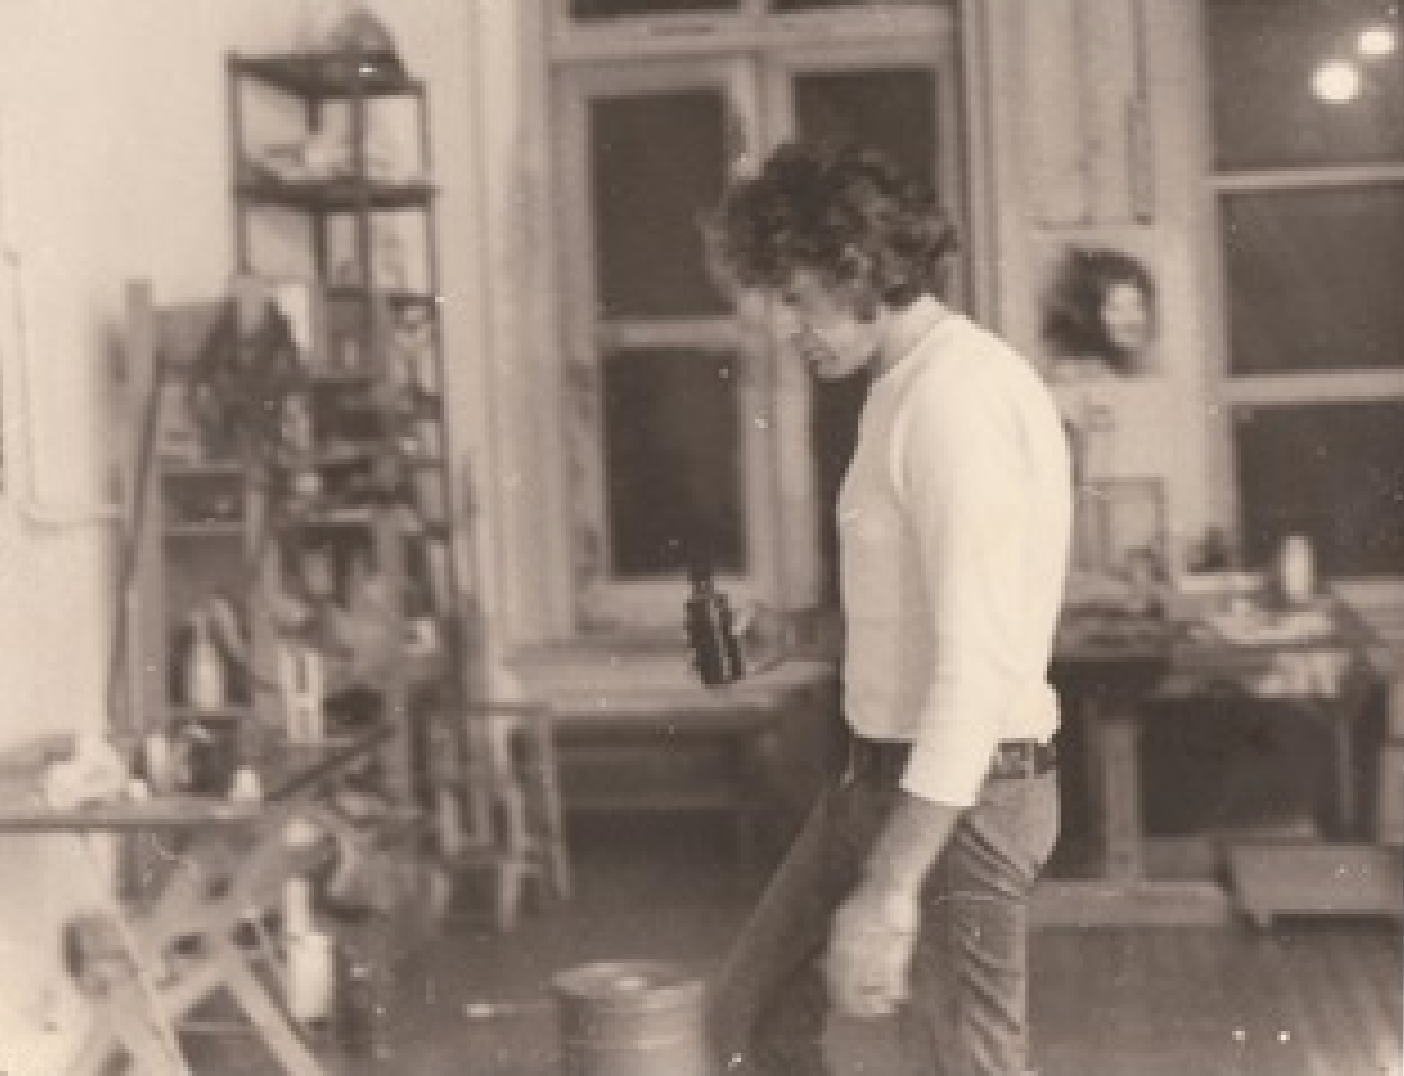 This is my father, George Kokines, painting in his loft on Greene Street, between Prince and Broome West side of street)) probably somewhere 1971-3-ish.  Of course he lived there, too.  He built a loft bedroom on a platform with stairs up to it, a kitchen, and  a bathroom, and painted the floors.